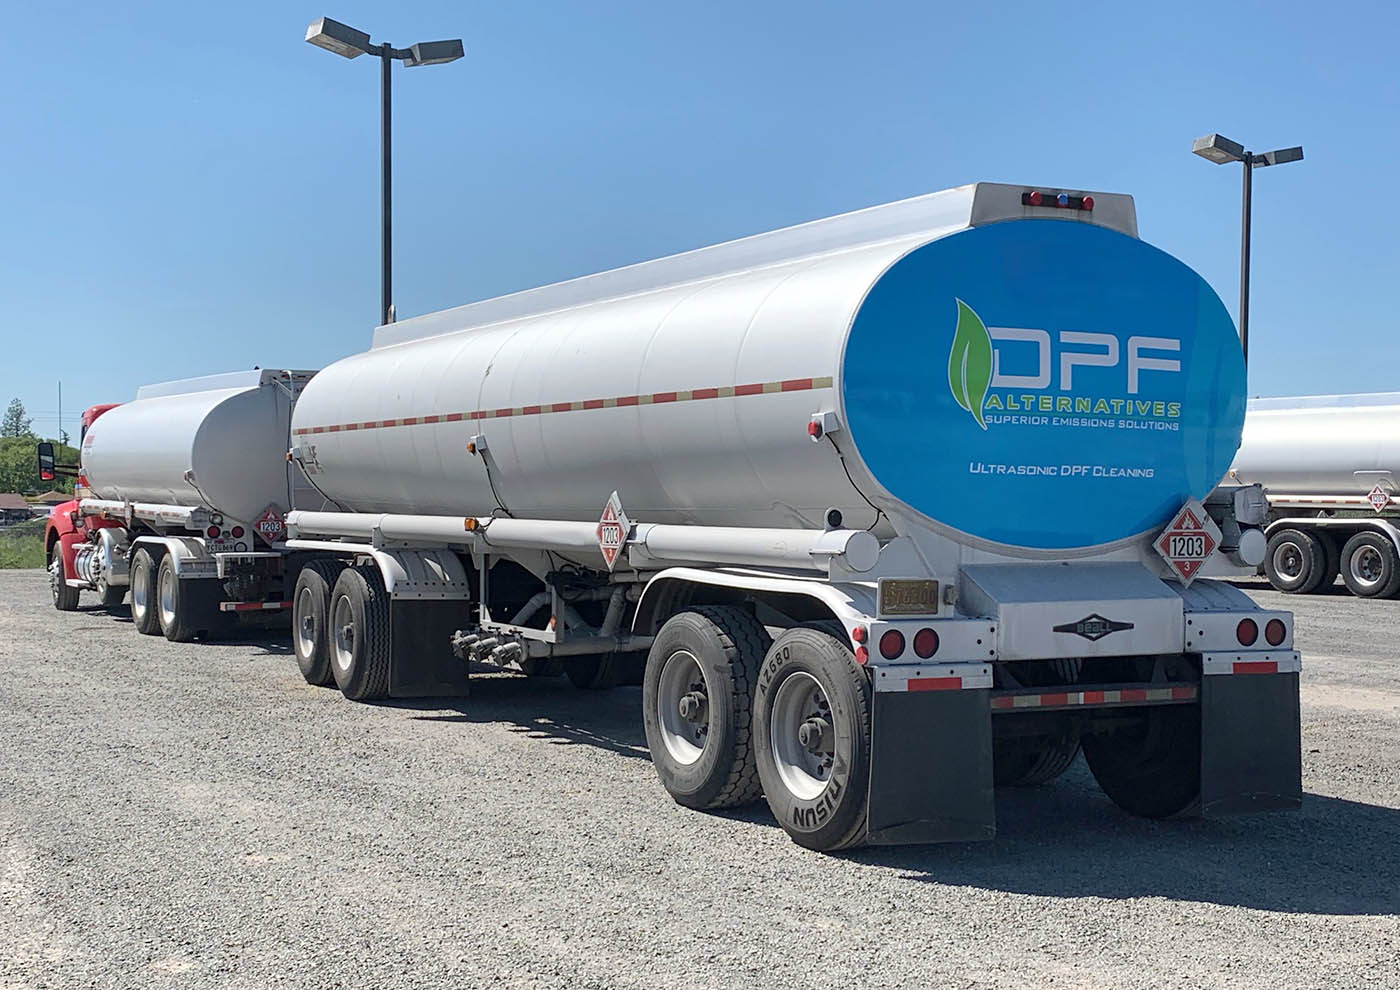 Back of a clean, large, reflective semi truck rig, contact DPF Alternatives for a DPF cleaning in Pittsburgh.